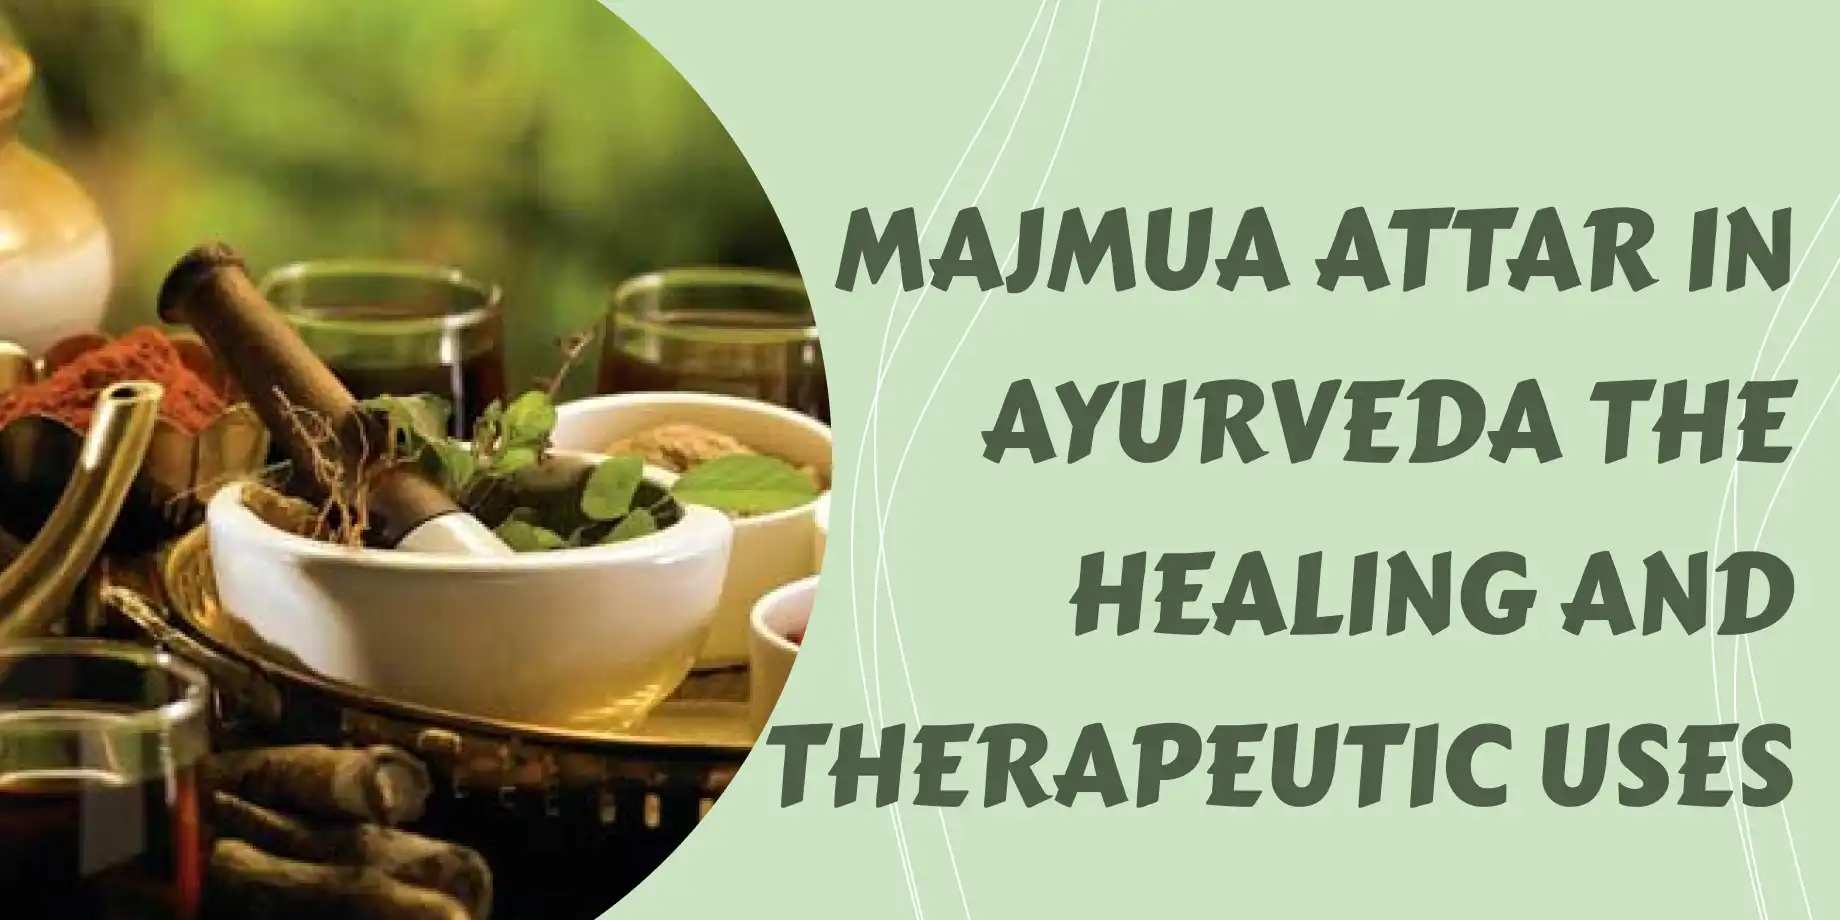 Majmua Attar in Ayurveda The Healing and Therapeutic Uses